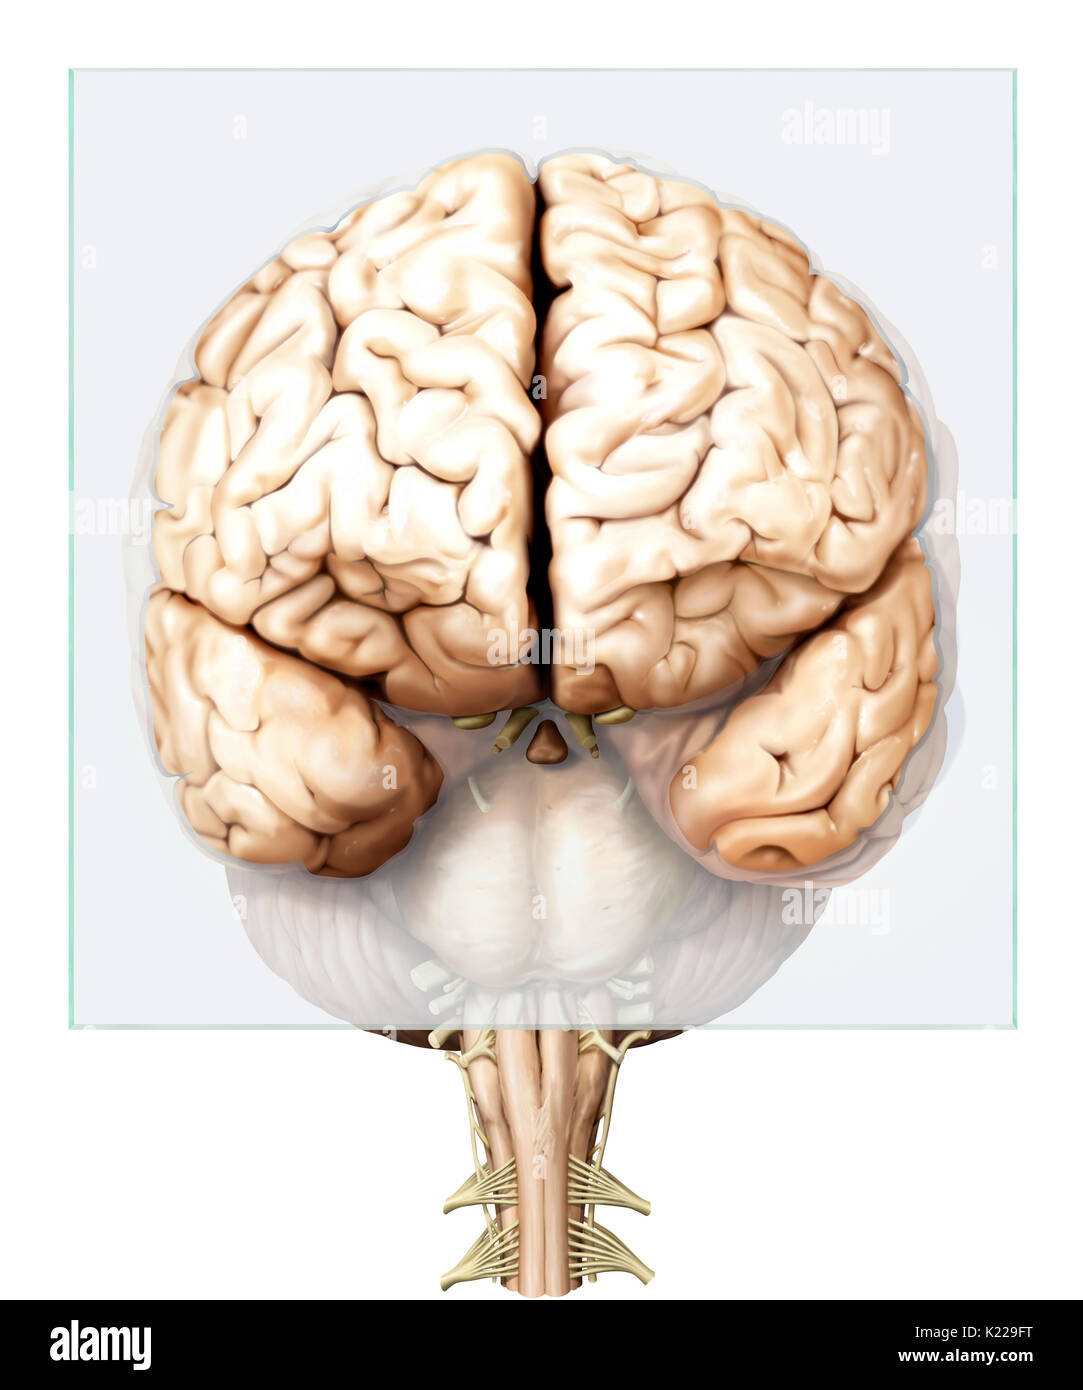 Part of the central nervous system enclosed in the skull, consisting of the cerebrum, cerebellum and brain stem; it is responsible for sensory perception, most movements, memory, language, reflexes and vital functions. Stock Photo